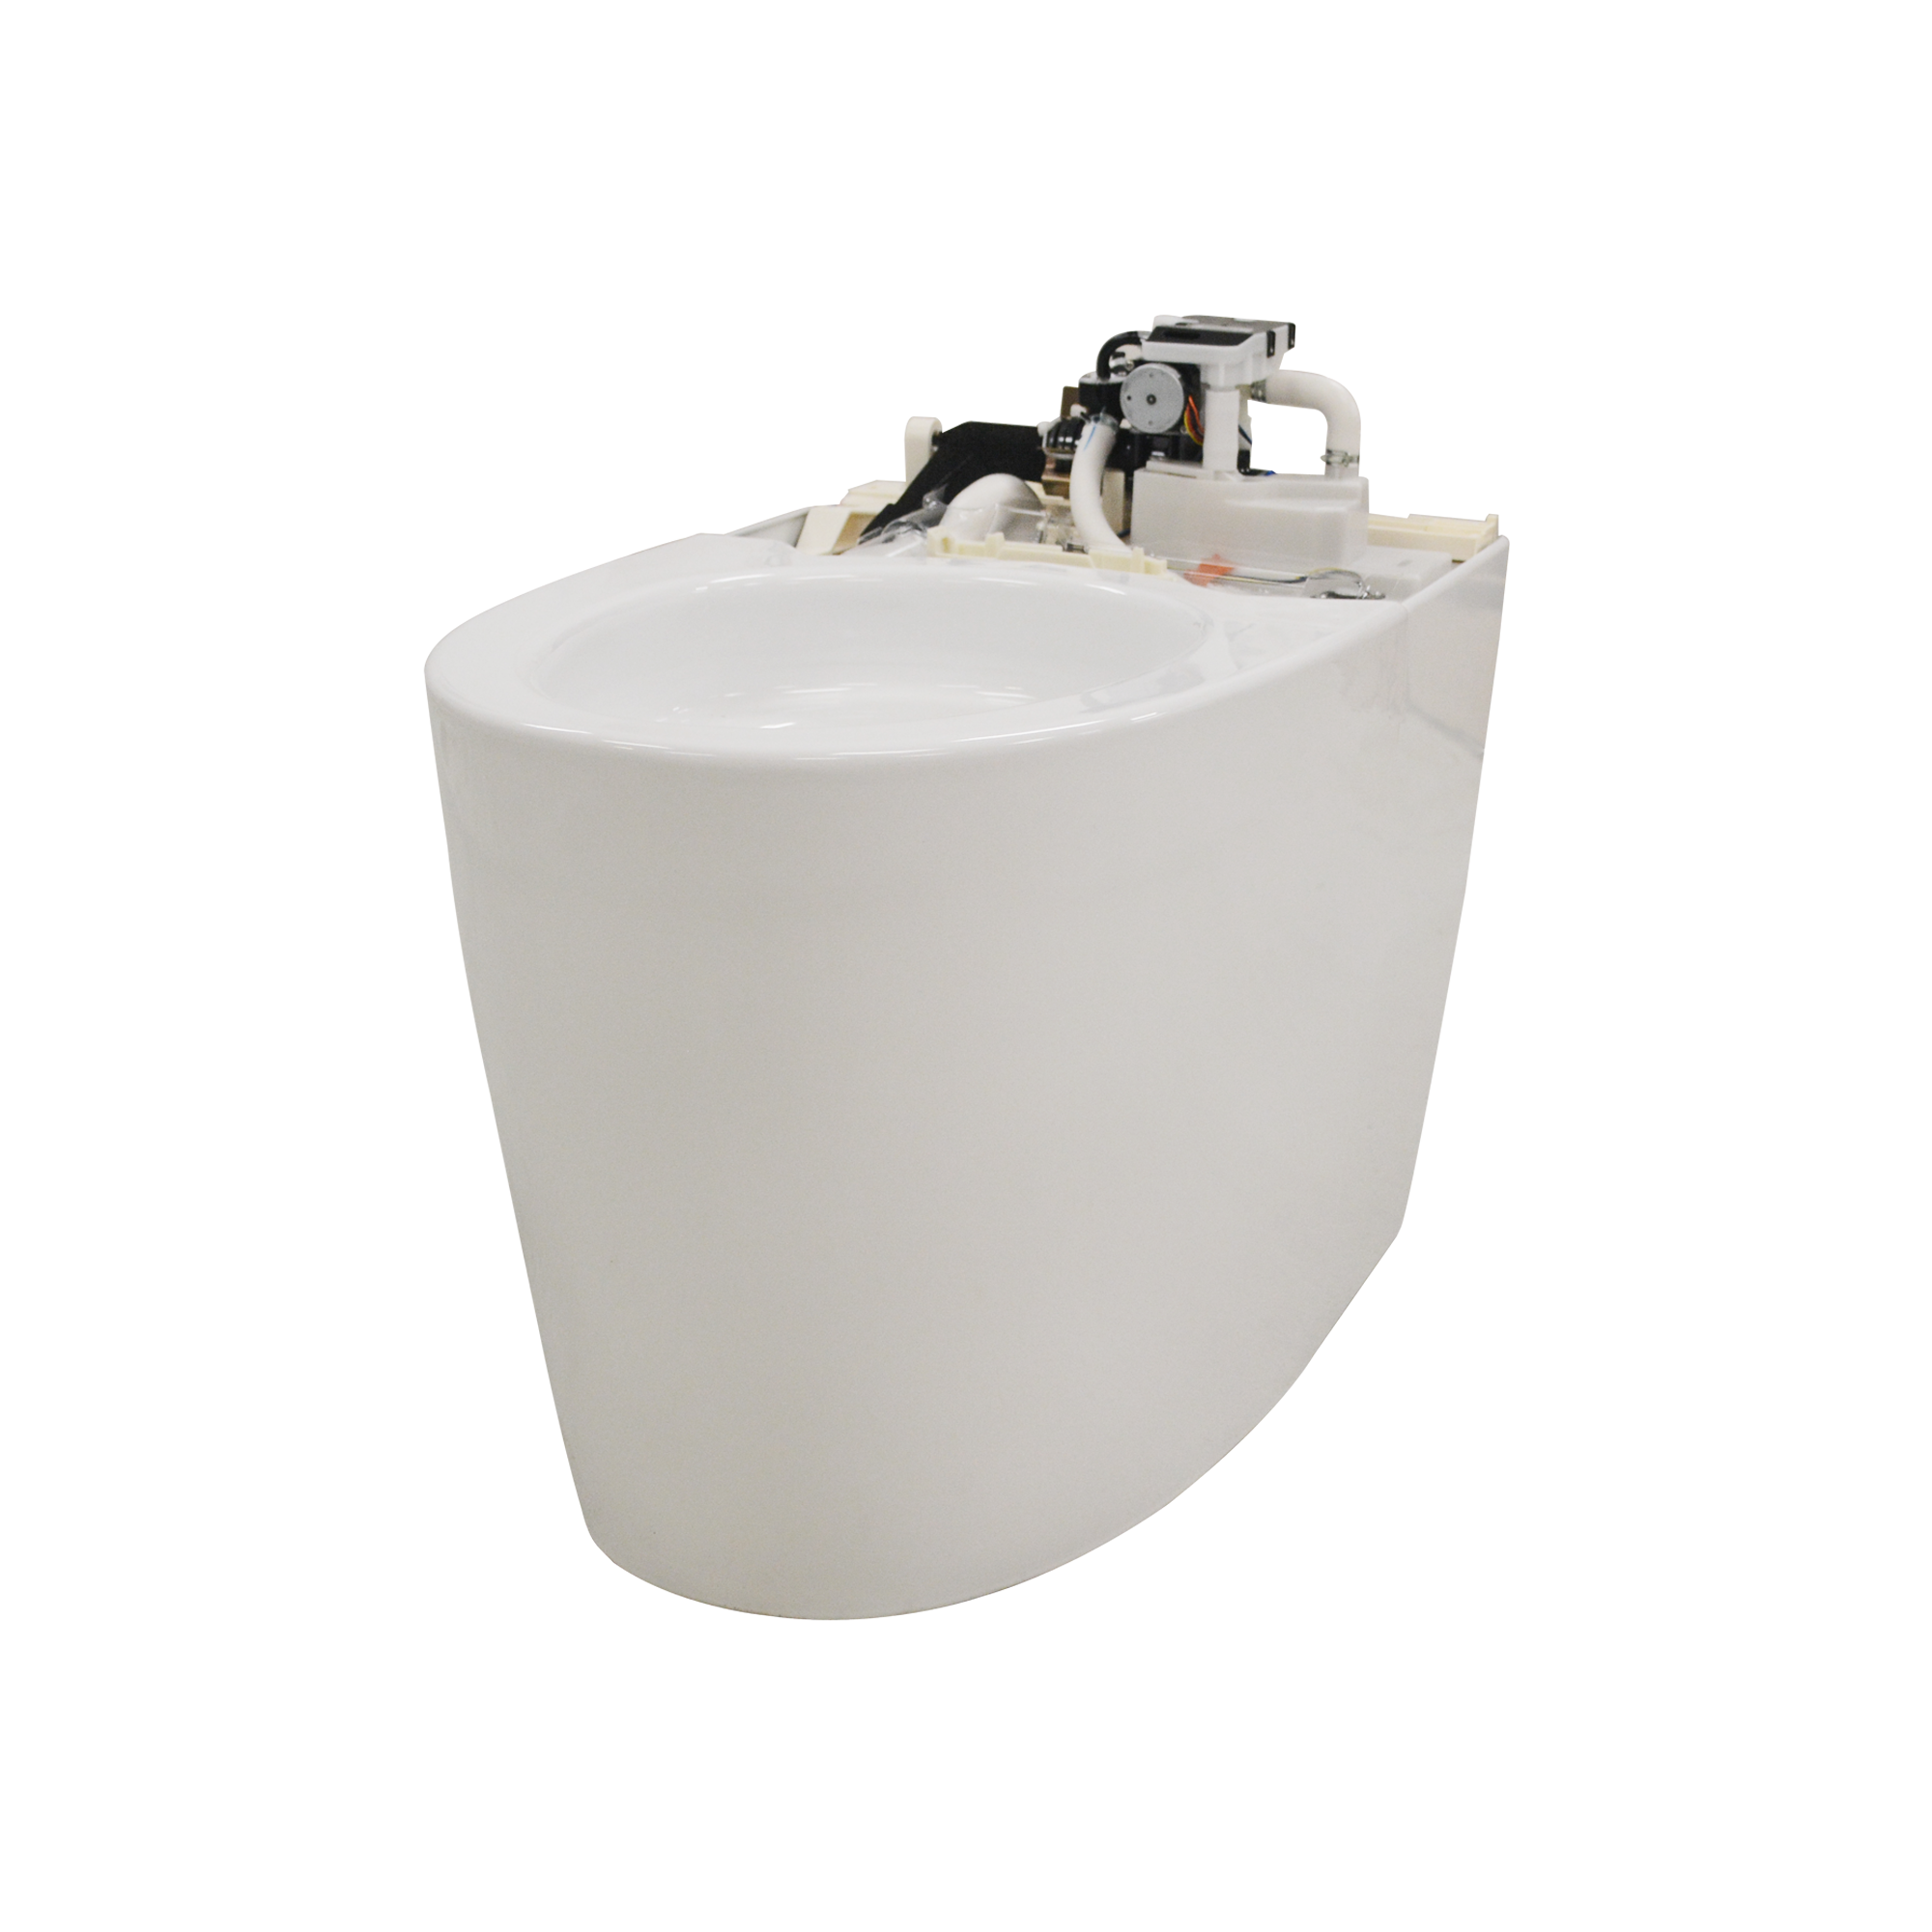 TOTO®NEOREST® Dual Flush 1.0 or 0.8 GPF Elongated Toilet Bowl for AH and RH, Sedona Beige- CT989CUMFG#12